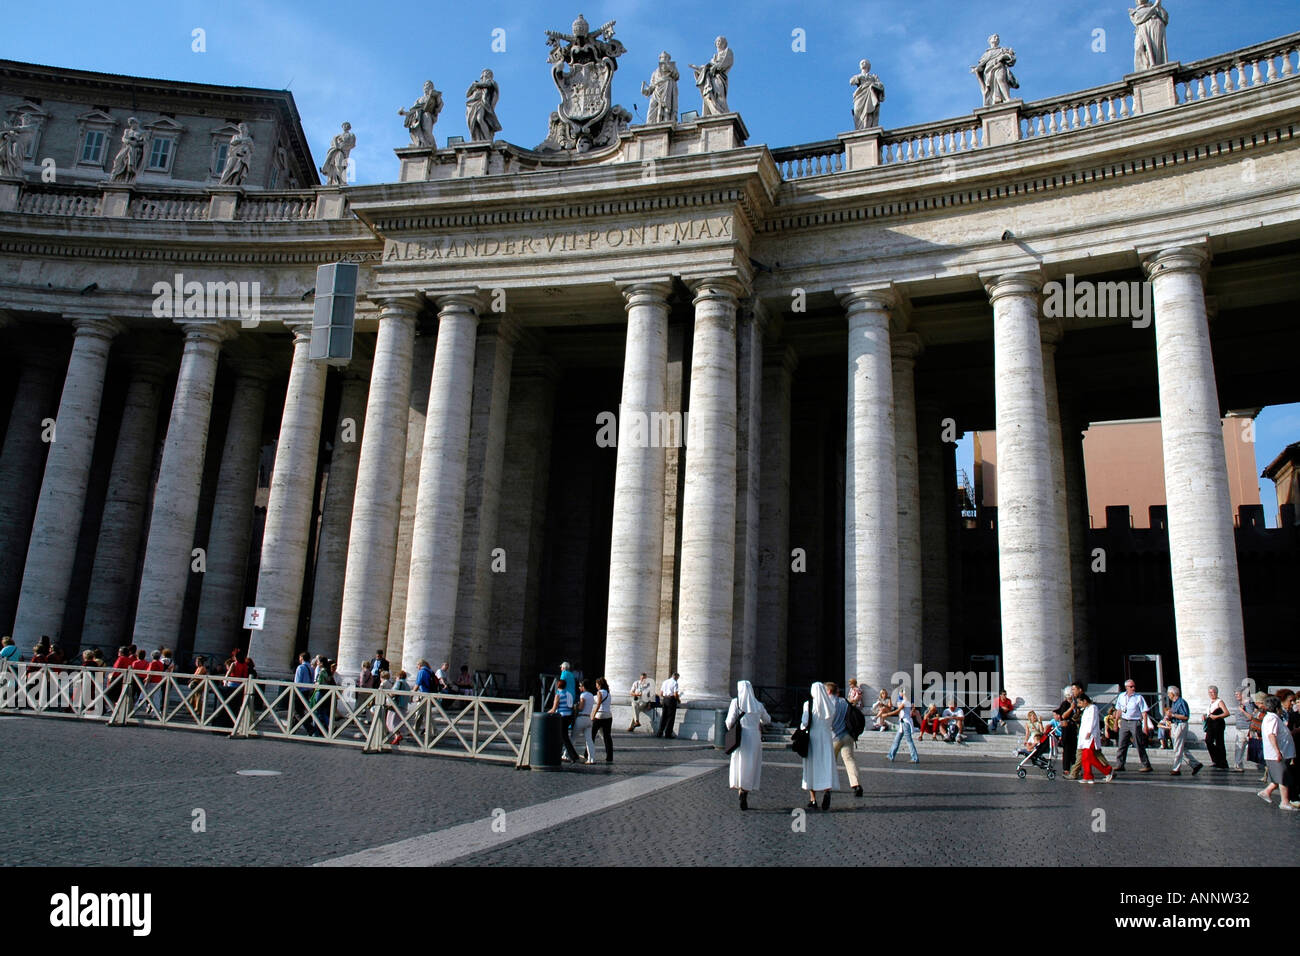 The elliptical piazza of St Peter's Square in Rome its colonnades and columns designed by Gian Lorenzo Bernini Stock Photo